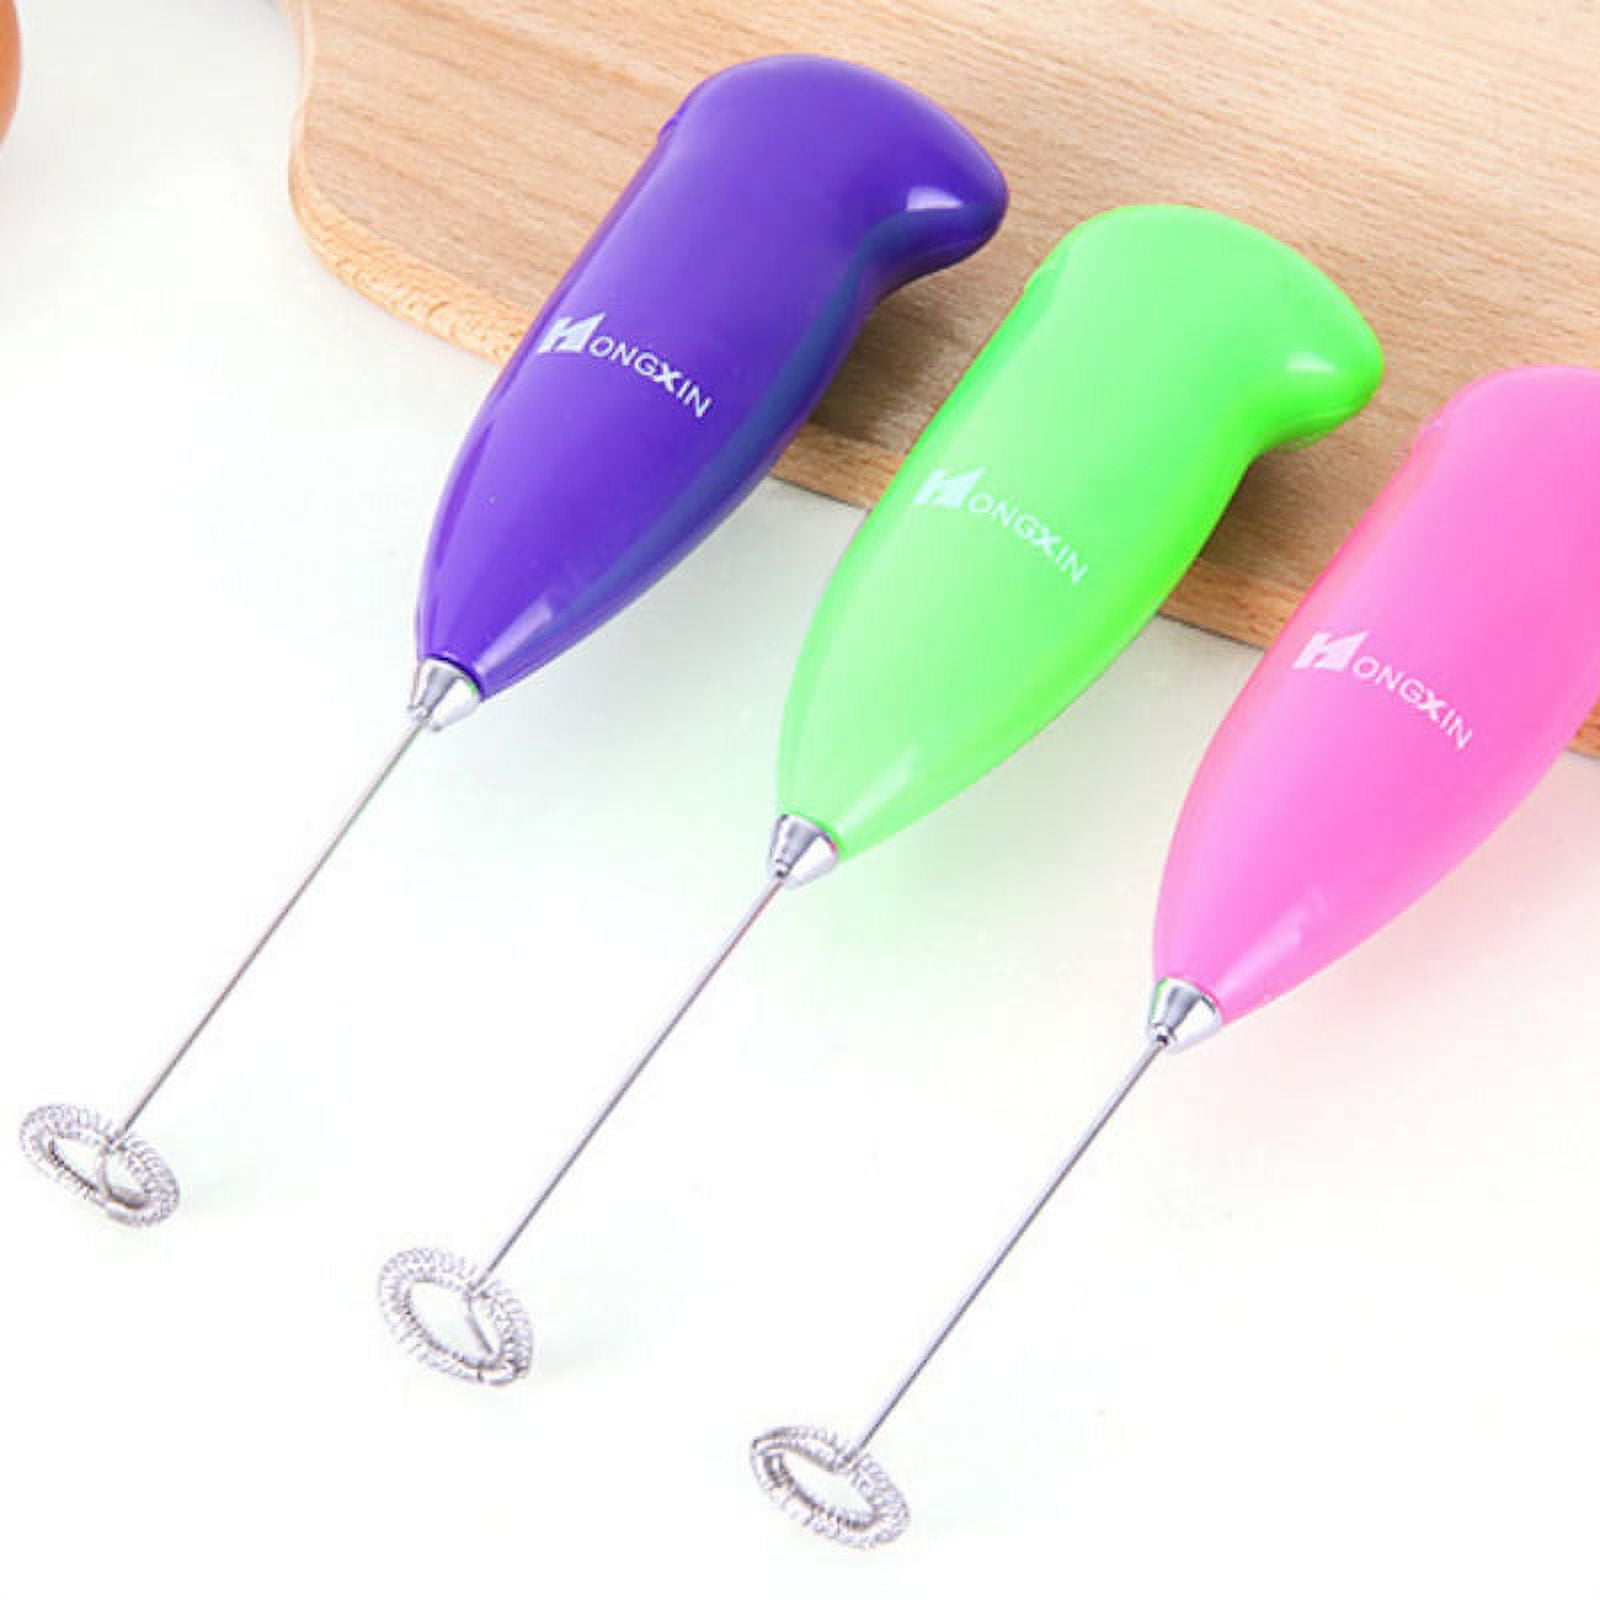 Egg Tools Handheld Whisk Electric Home Small Baking Cake Mixer Cream  Automatic Whisk Milk Coffee Mixer Mini Milk Frother Tools From  Cleanfoot_elitestore, $4.35